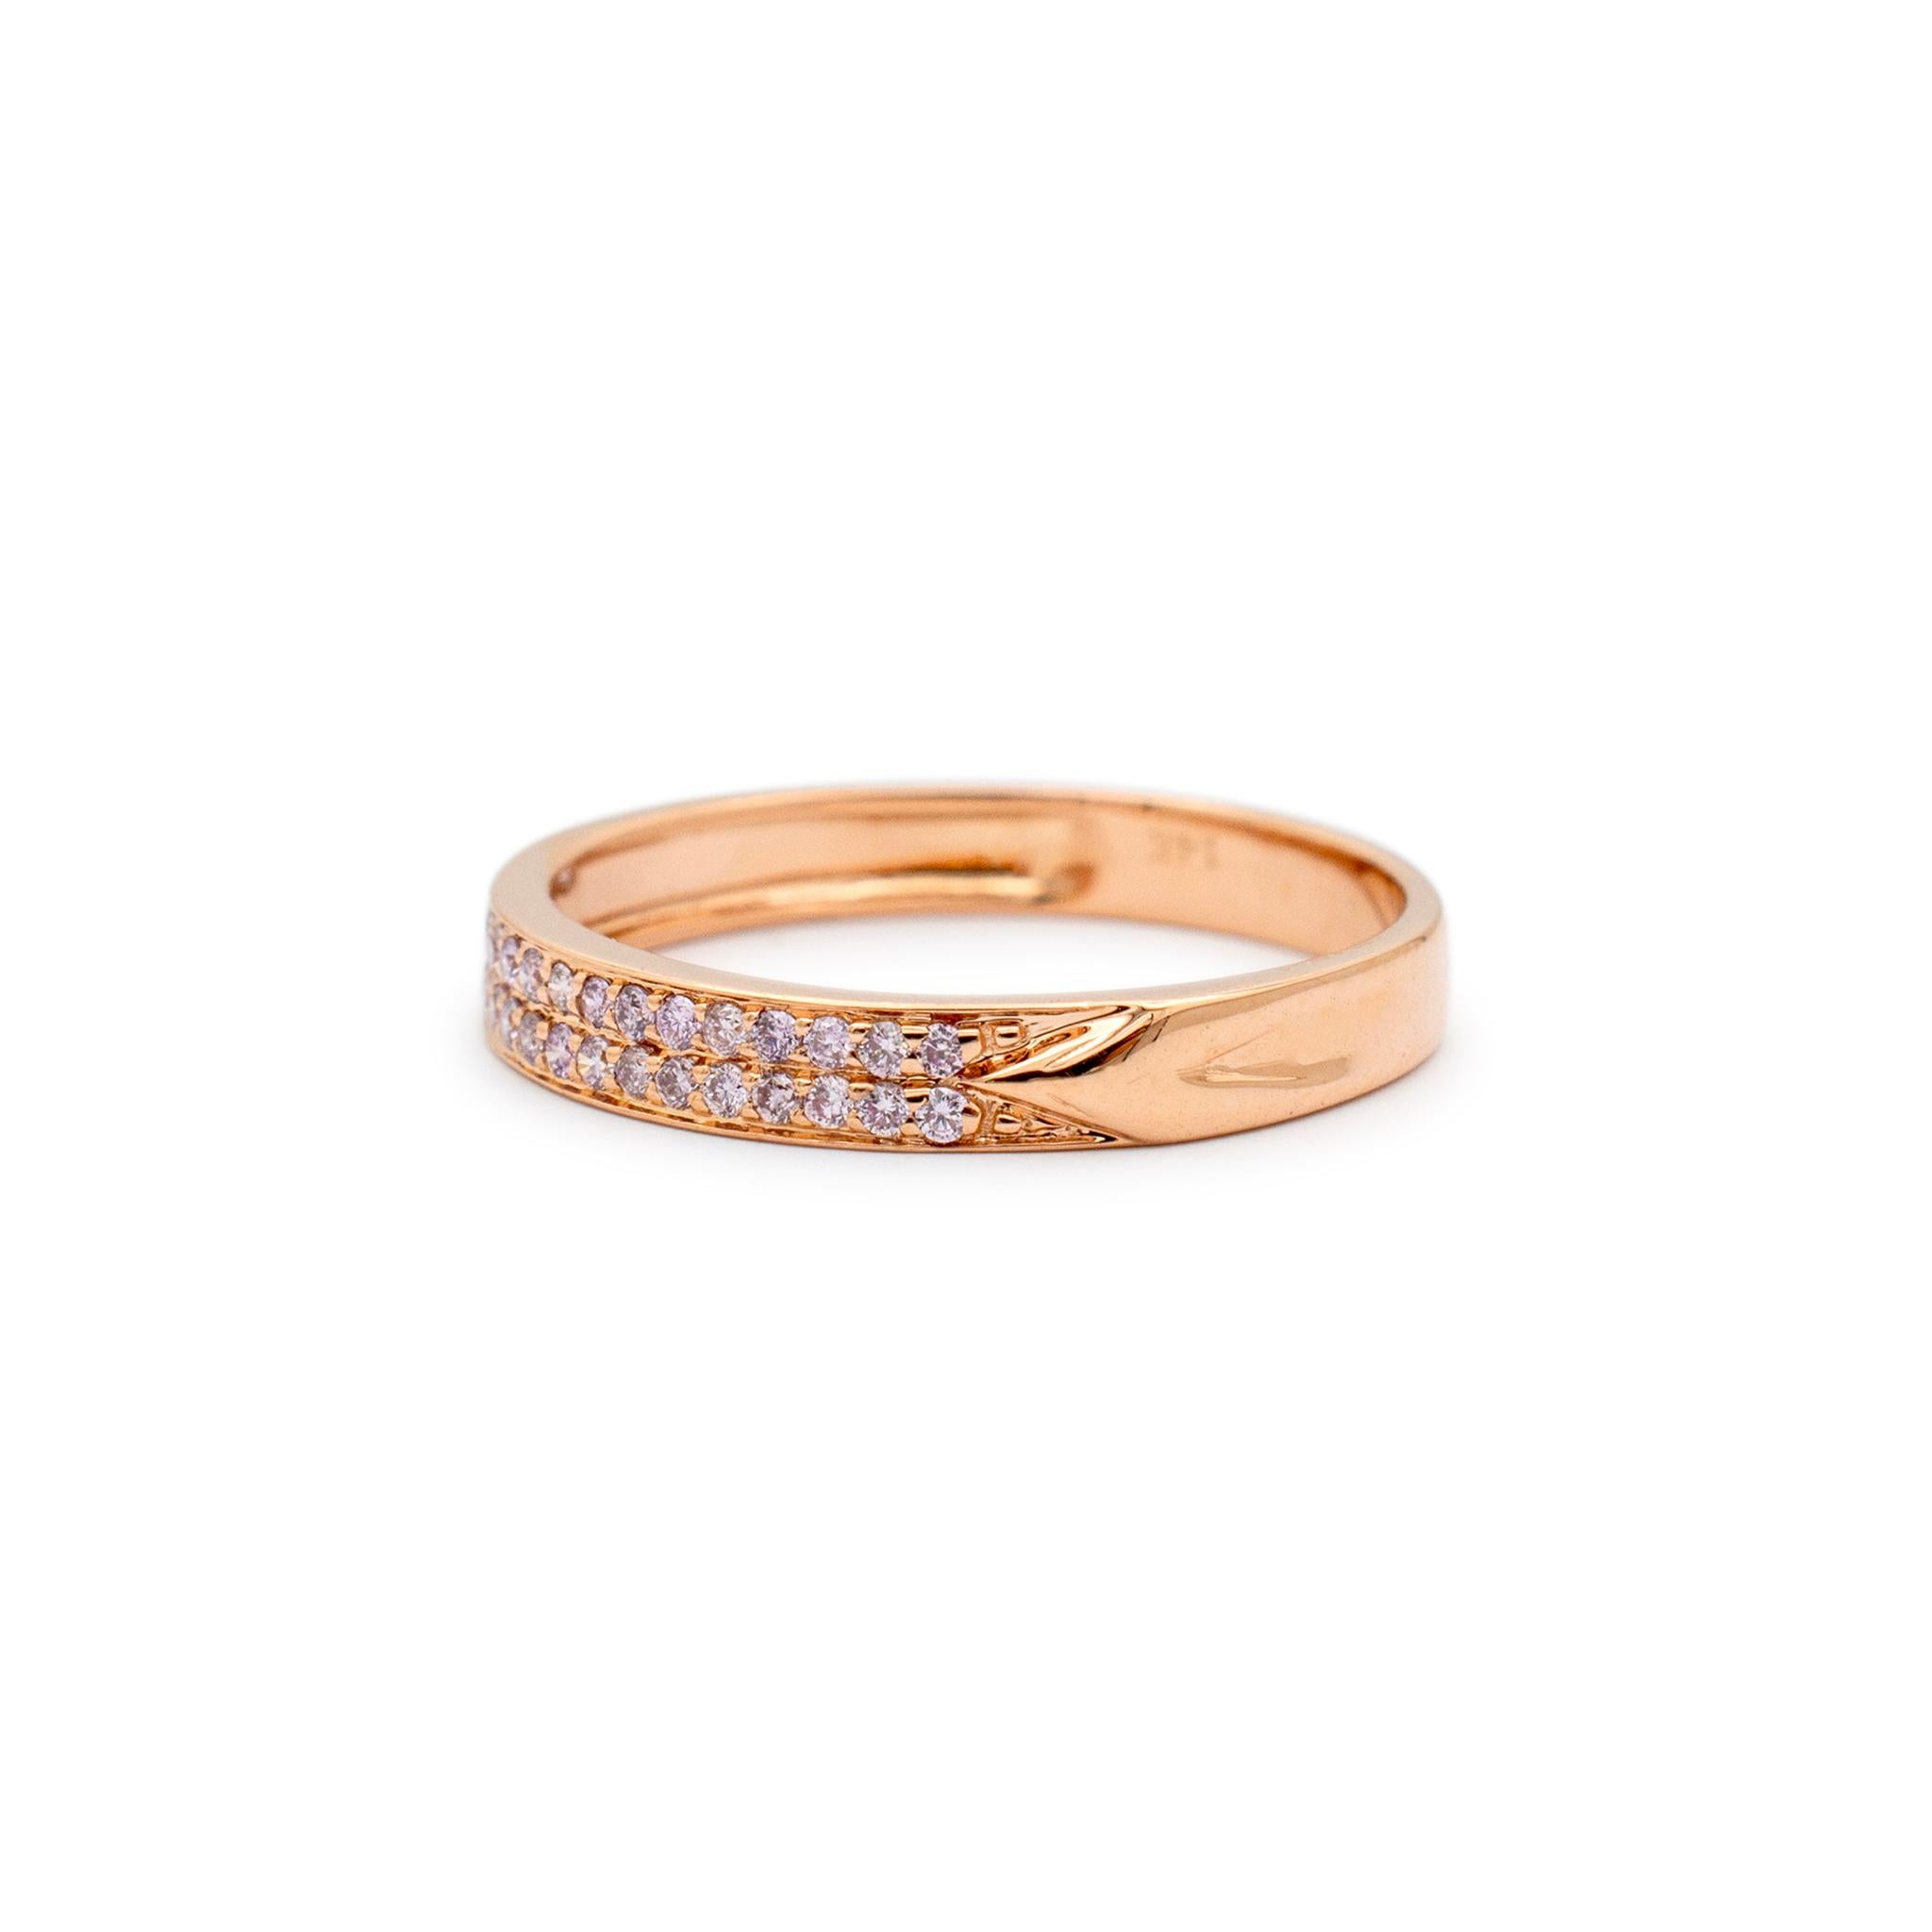 Gender: Ladies

Metal Type: 14K Rose Gold

Size: 7

Width: 3.05 mm

Weight: 1.88 grams

One ladies 14K rose gold two-row diamond wedding band with a half-round shank. The metal was tested and determined to be 14K rose gold. Engraved with 